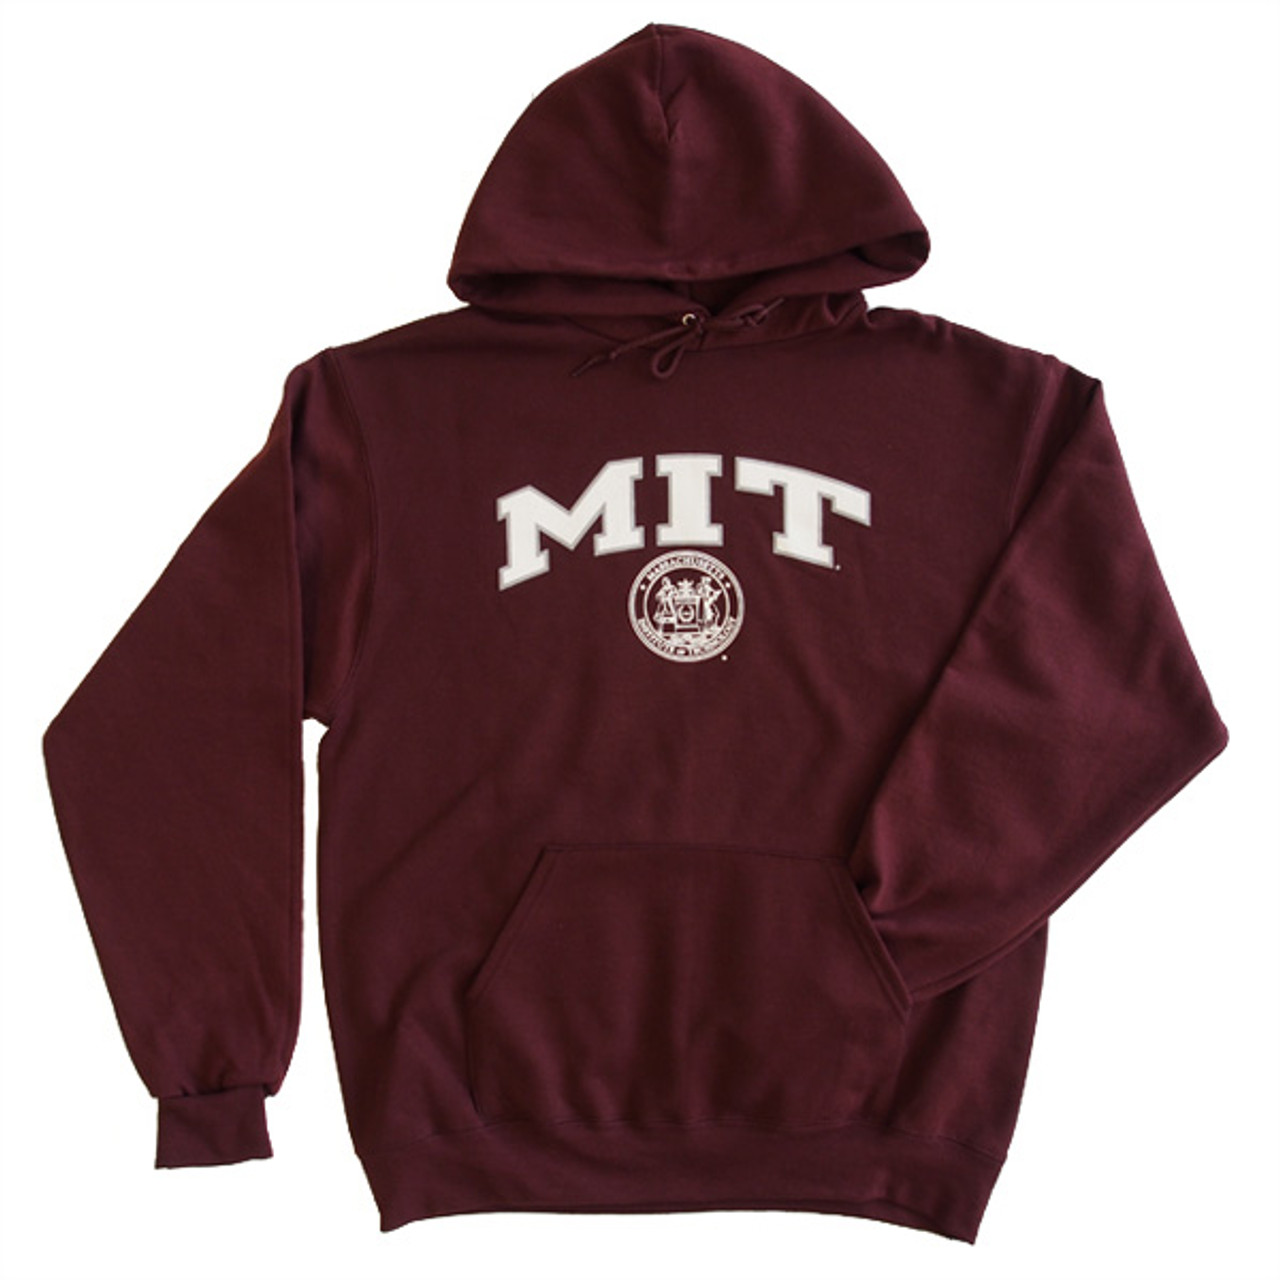 MIT hoodie logo and with seal